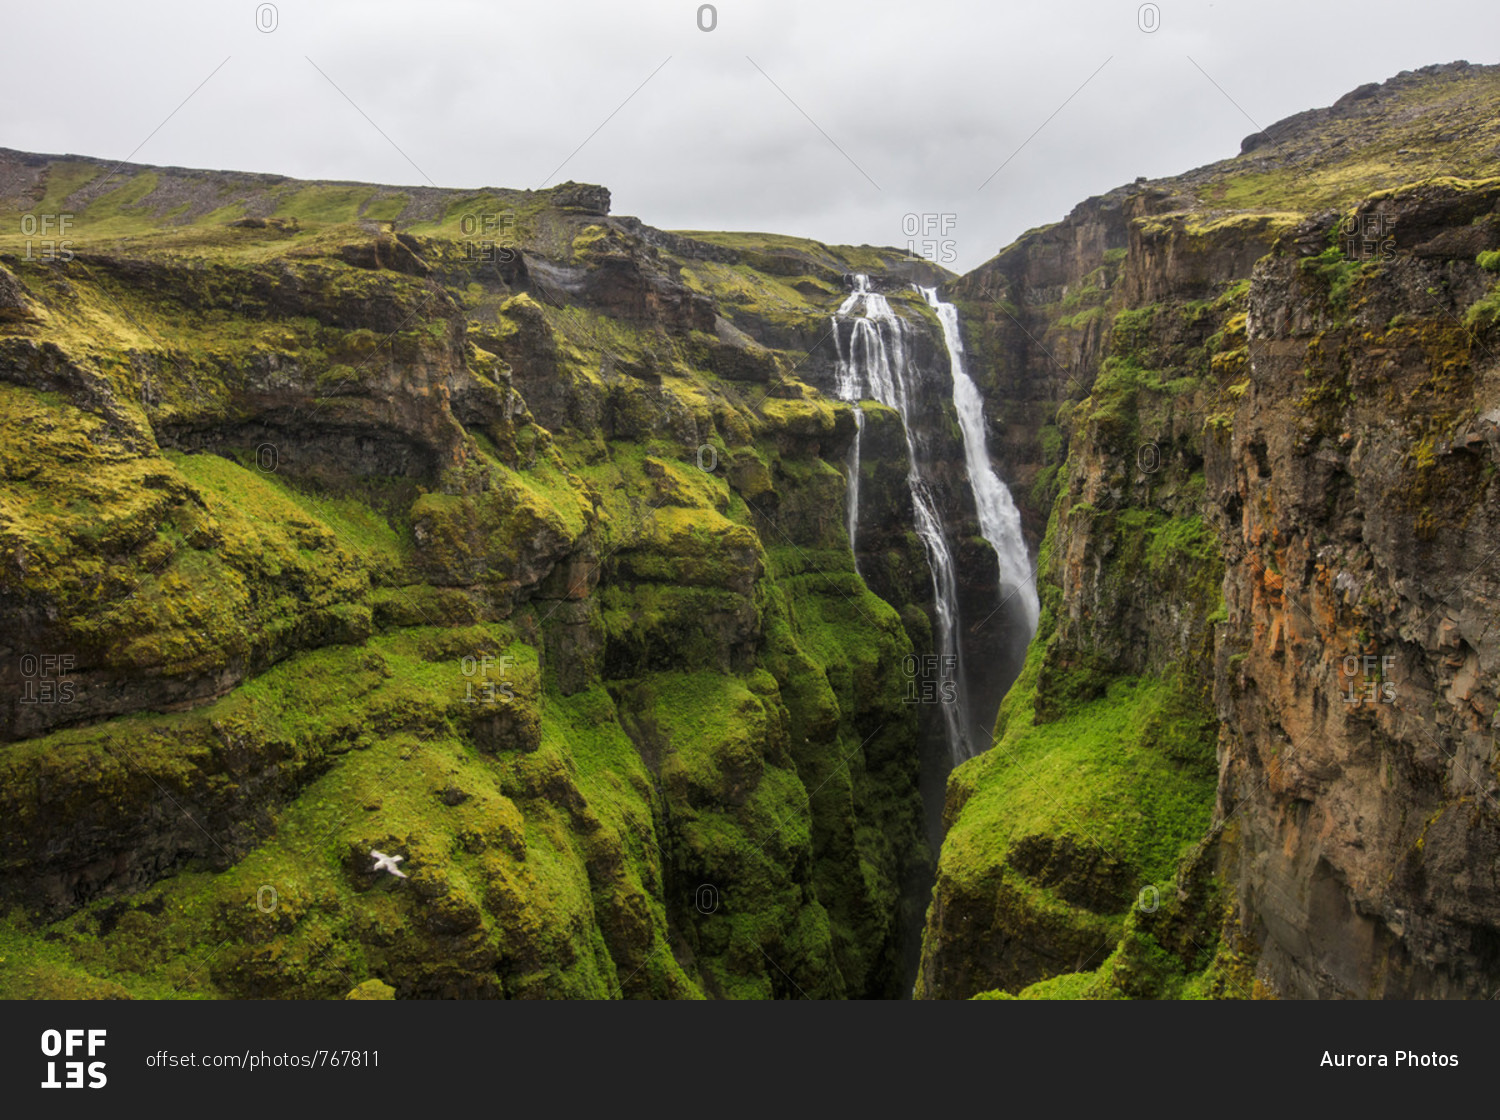 Glymur Waterfall is the second highest waterfall in Iceland and a popular hike for travelers and tourists. Located just over an hour from Reykjavik, the falls are nearly 200 meters (650 feet) high and attract a range of bird and animal life.